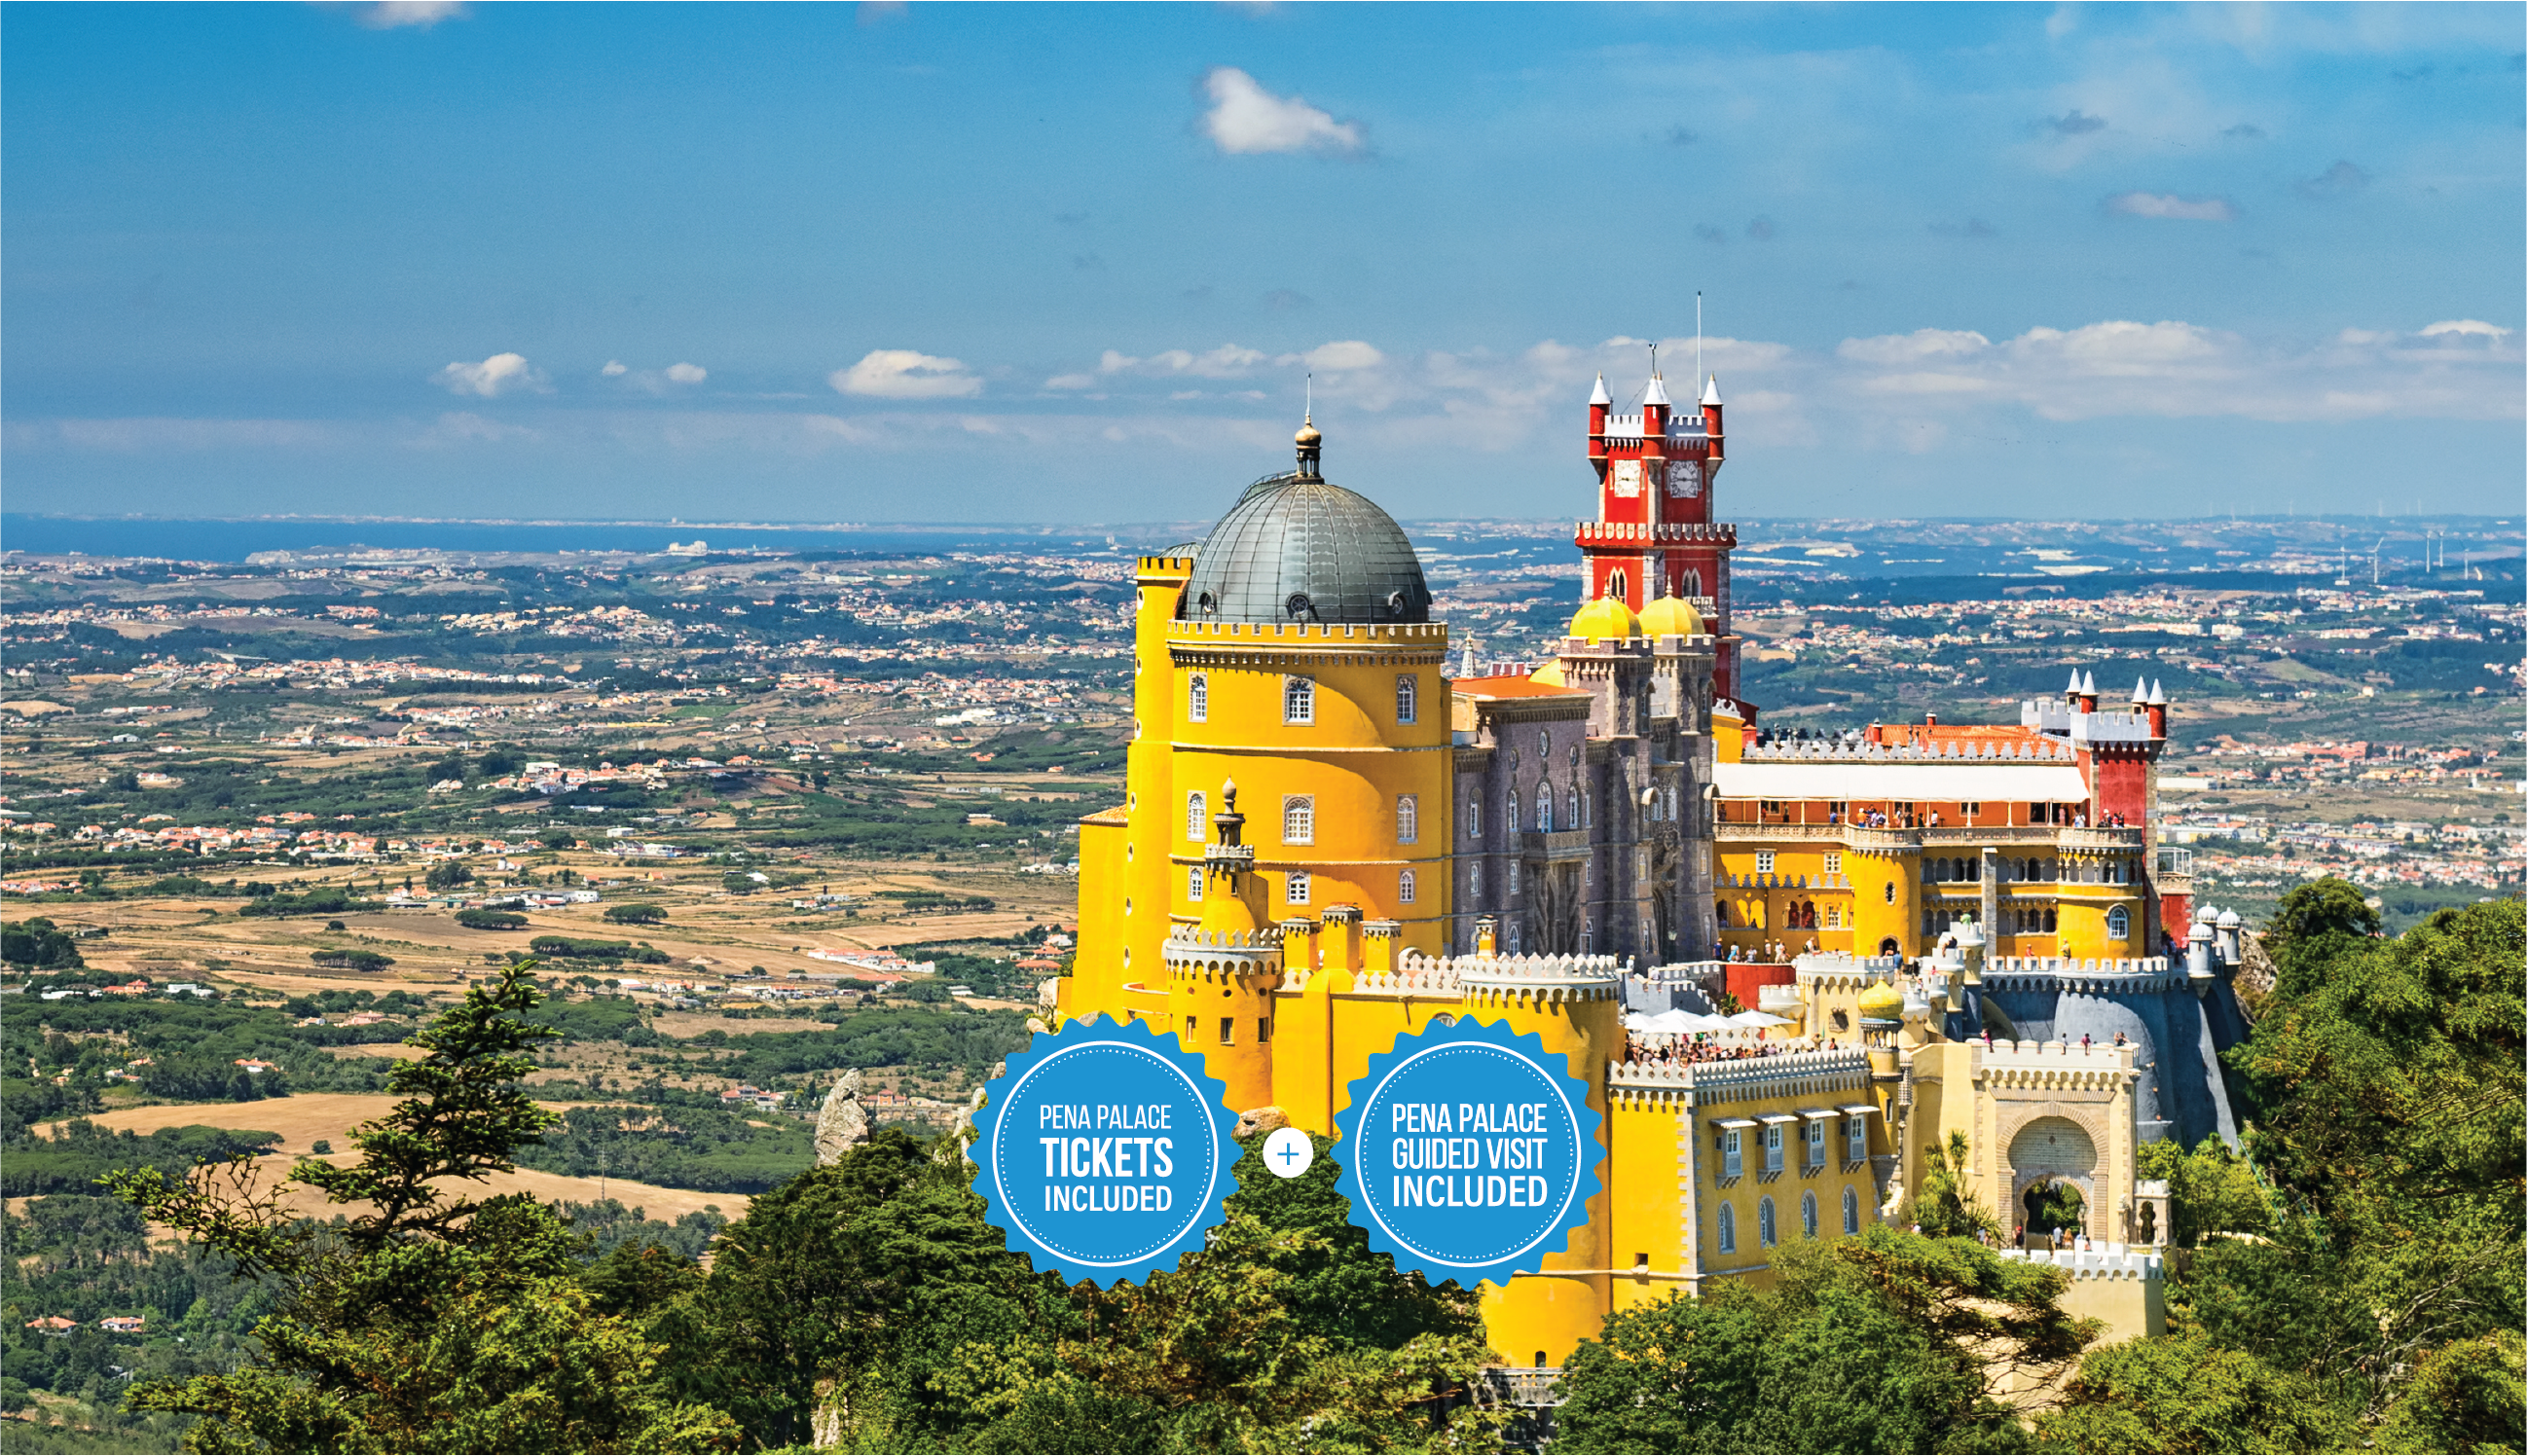 This is a photo of Pena Palace